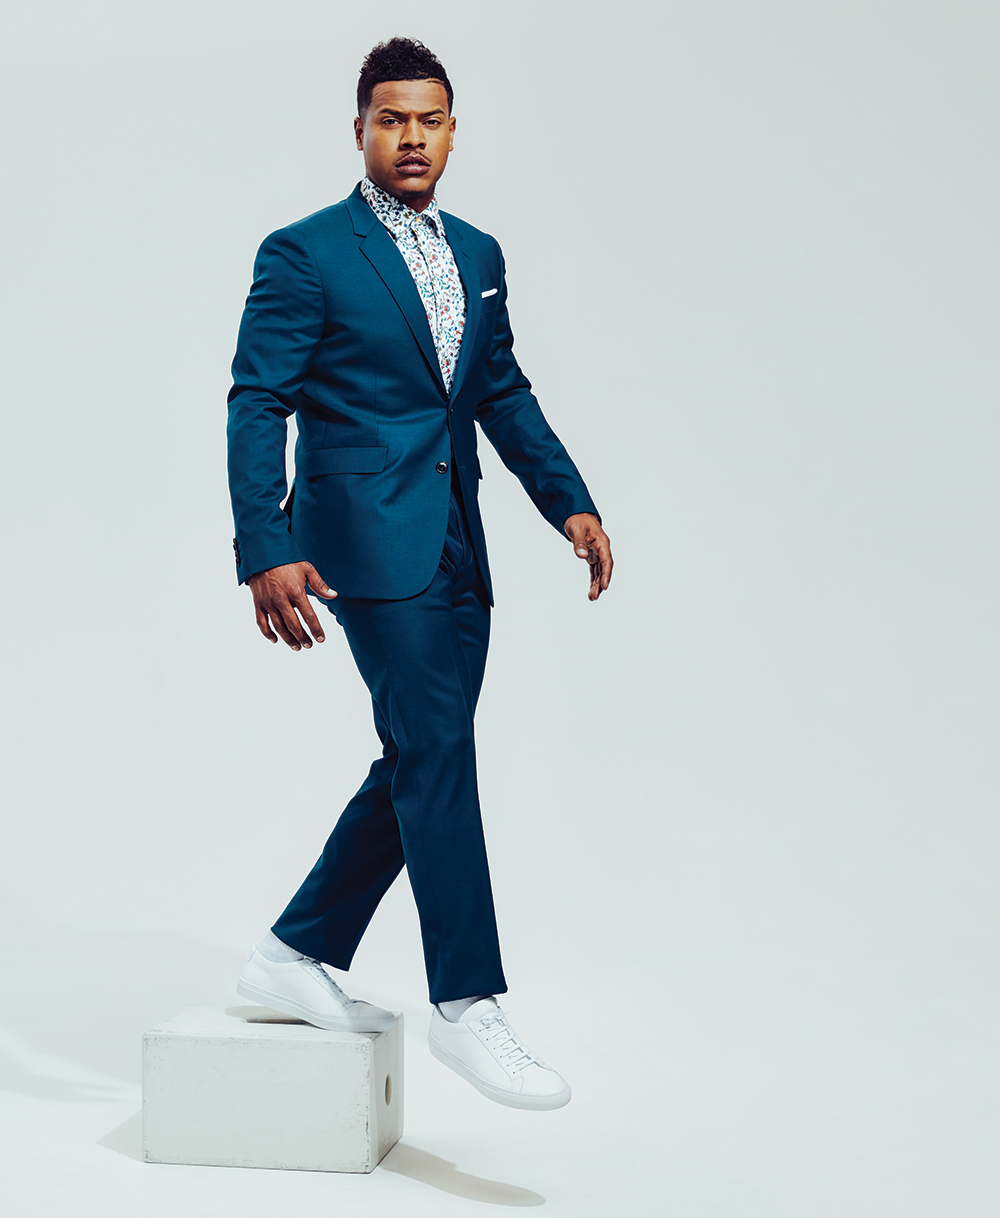 Marcus Stroman Is in a League of His Own - Sharp Magazine